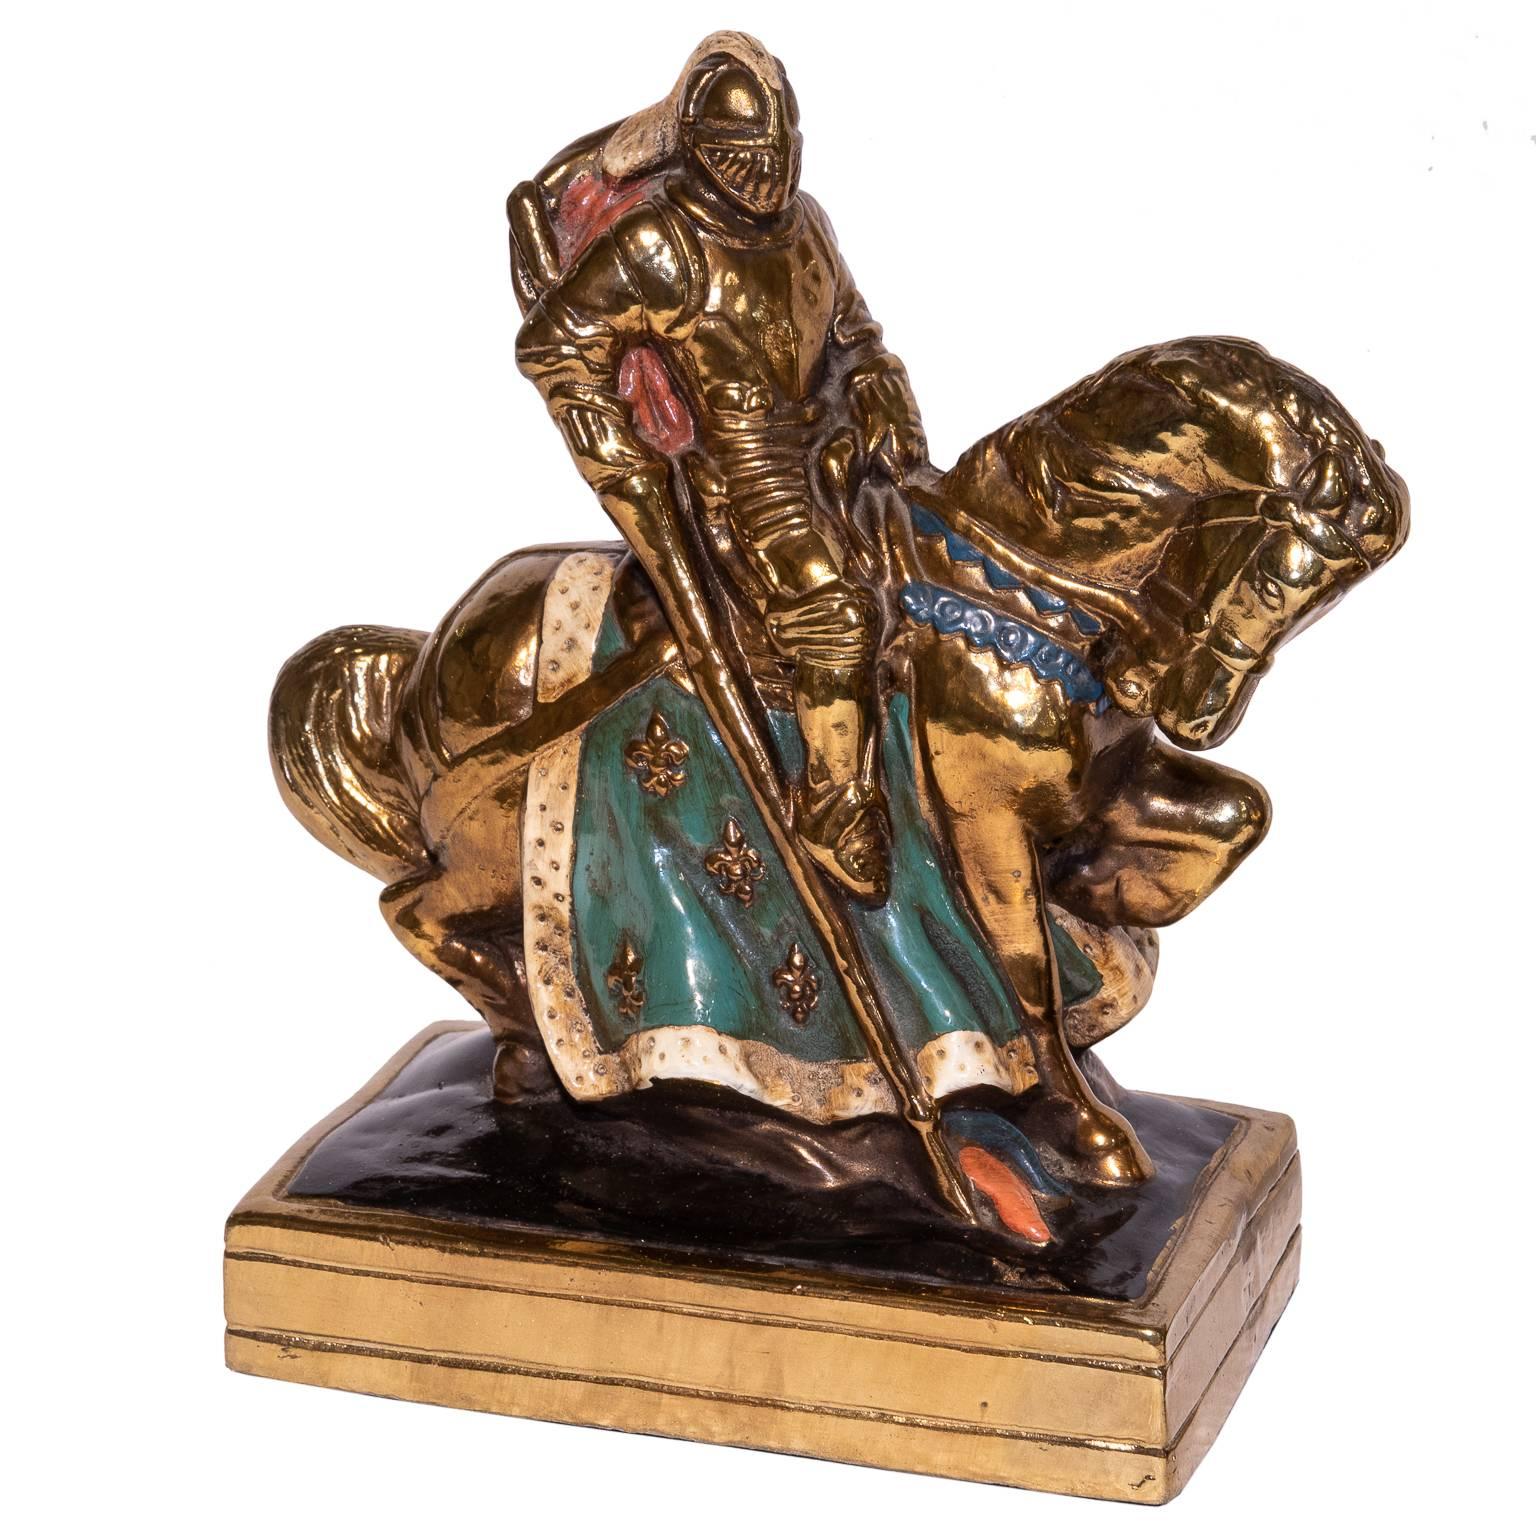 Knights on Horseback bronze bookends with original painted finish. Very nice condition and quality.